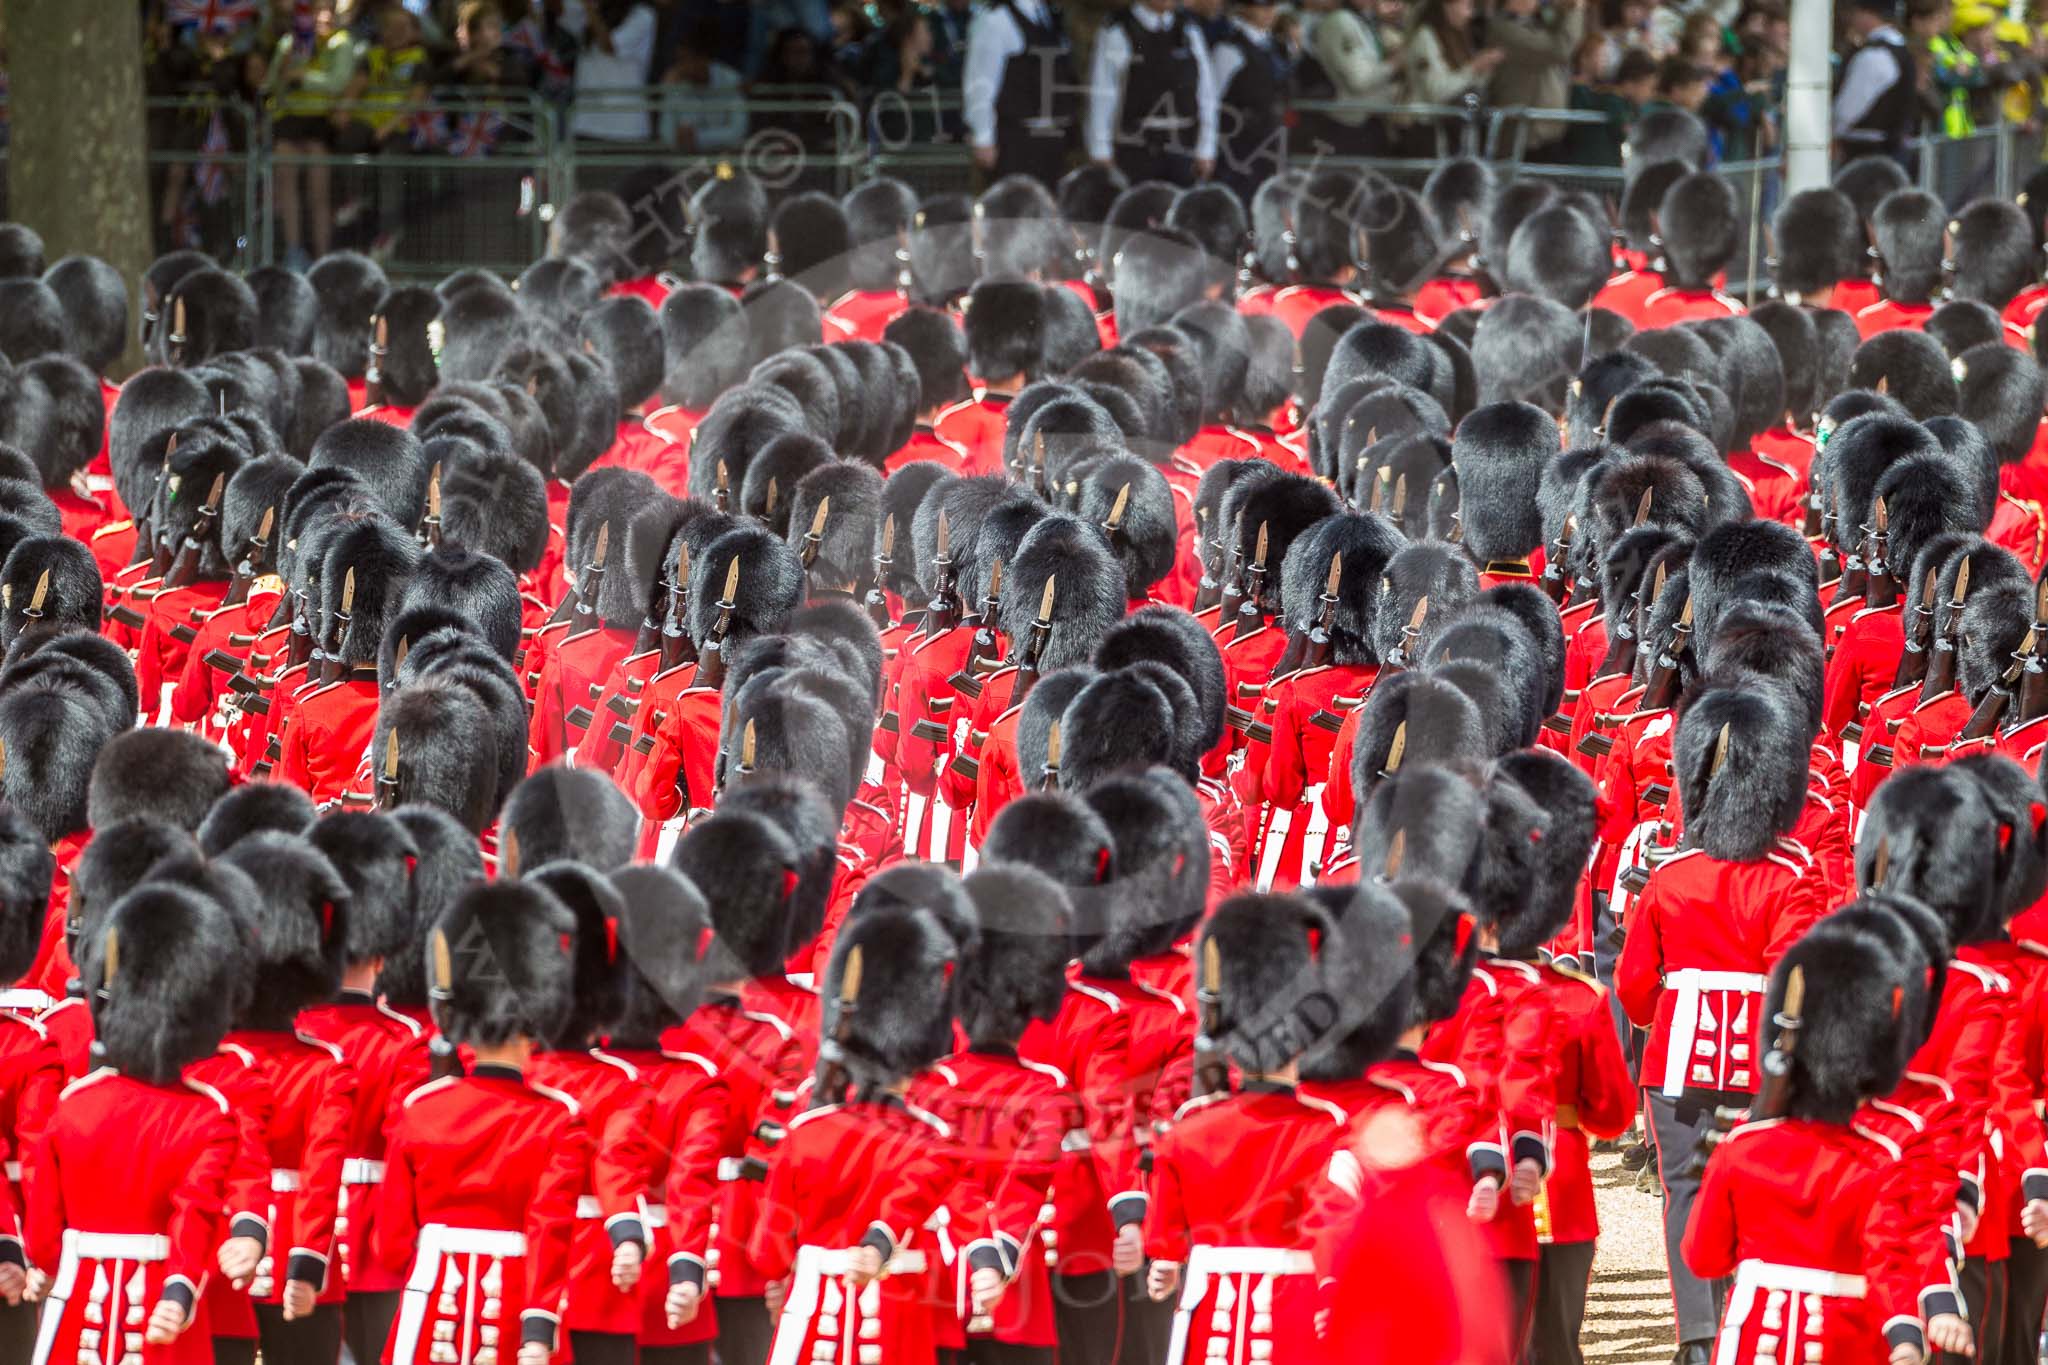 The Colonel's Review 2015.
Horse Guards Parade, Westminster,
London,

United Kingdom,
on 06 June 2015 at 12:10, image #591